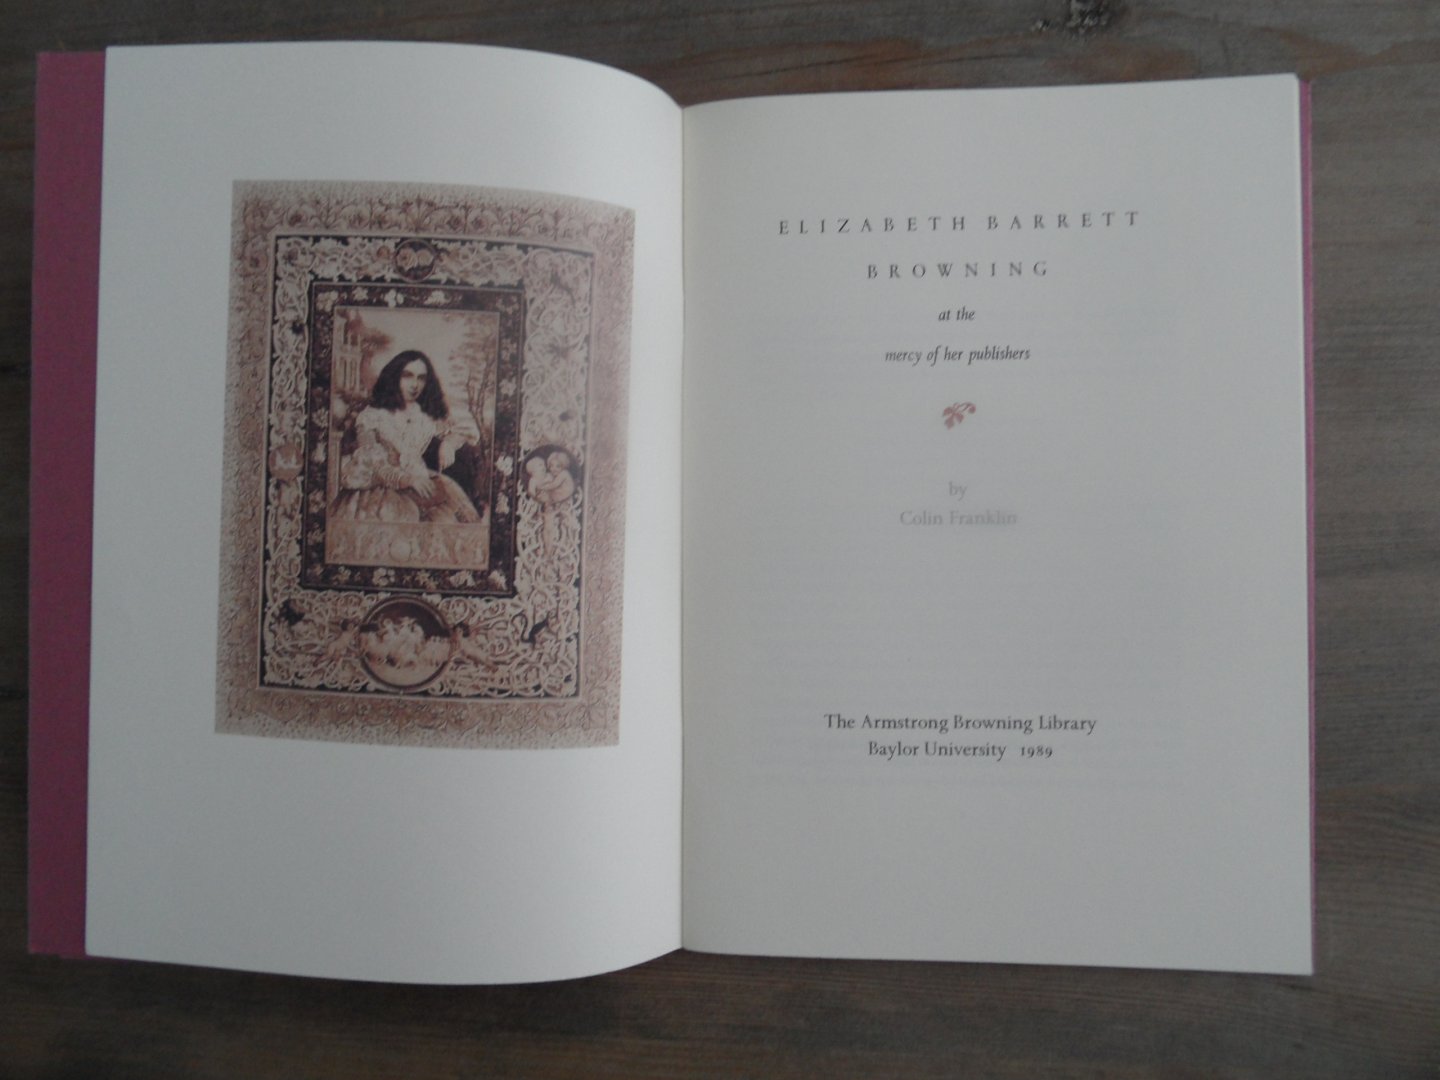 Franklin, Colin - Elizabeth Barrett Browning - at the mercy of her publishers